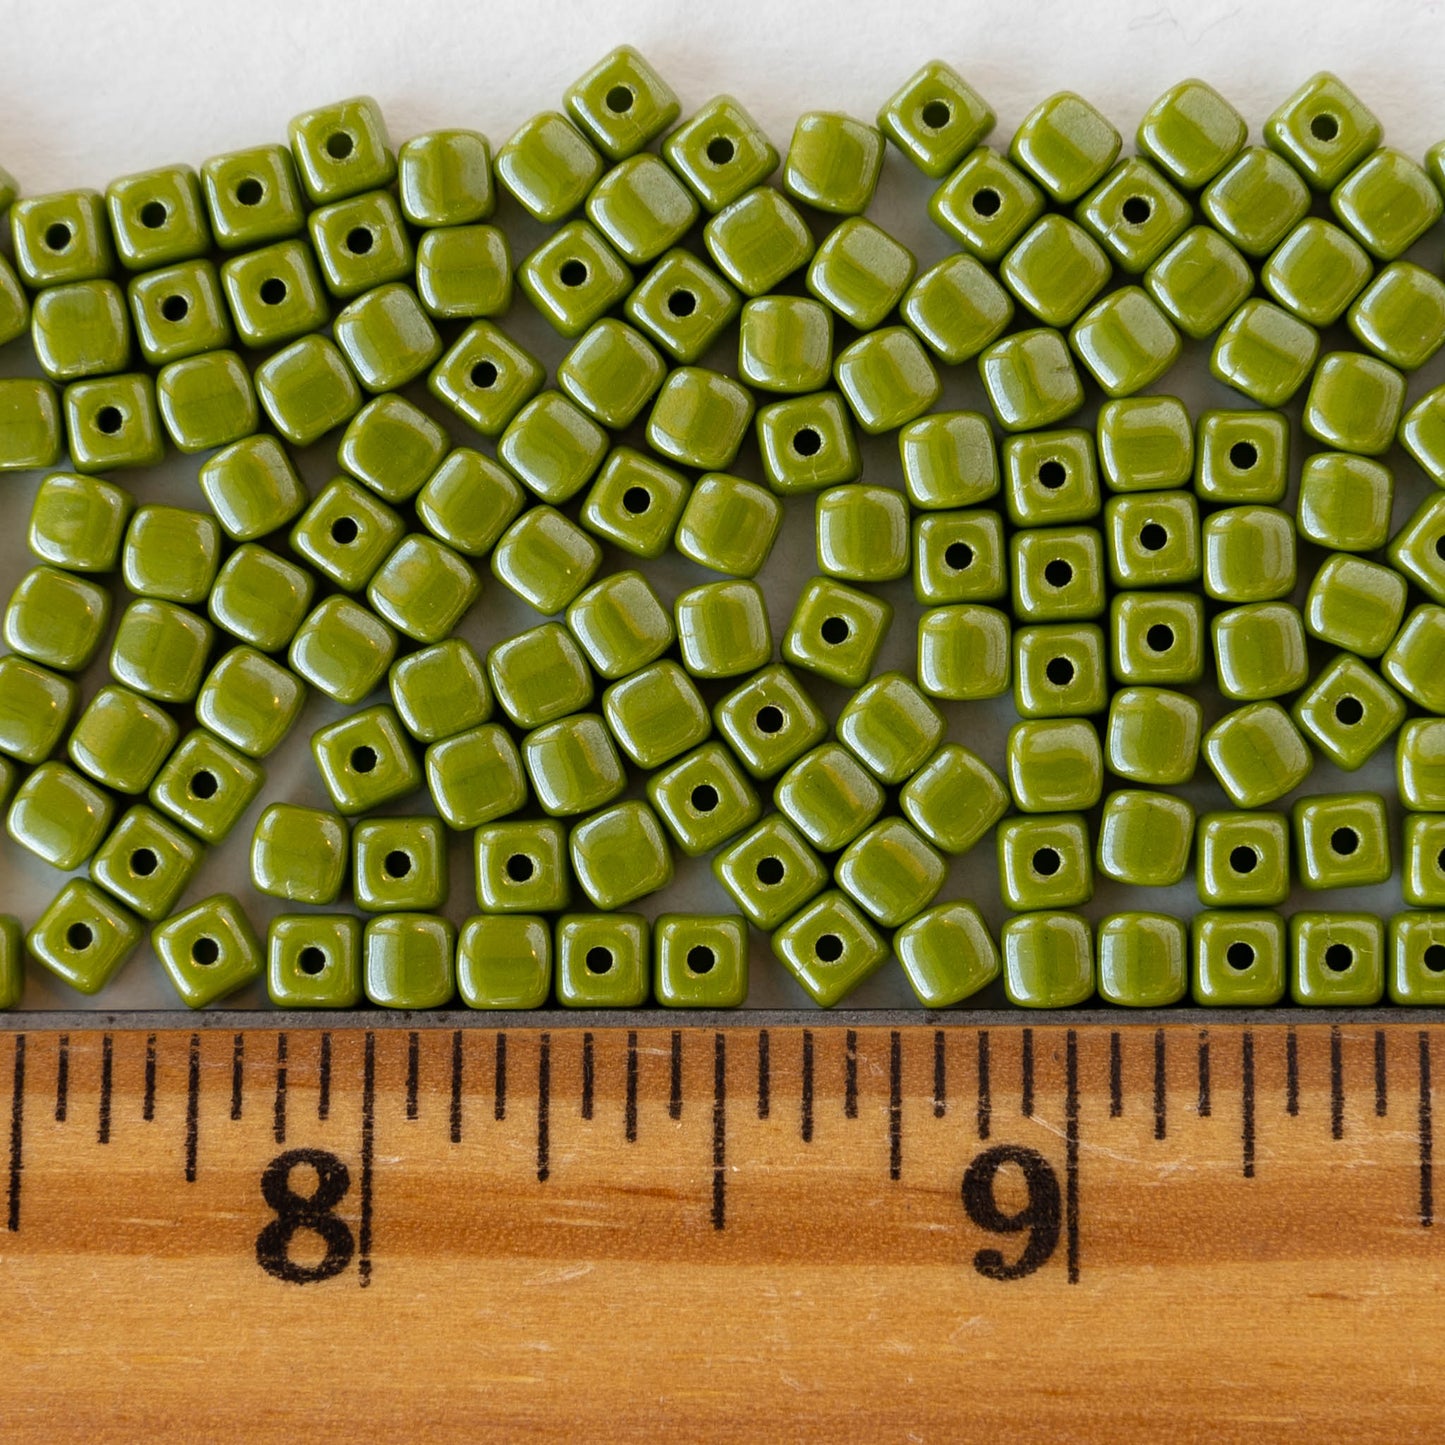 4mm Glass Cube Beads - Olive Green Luster - 100 beads